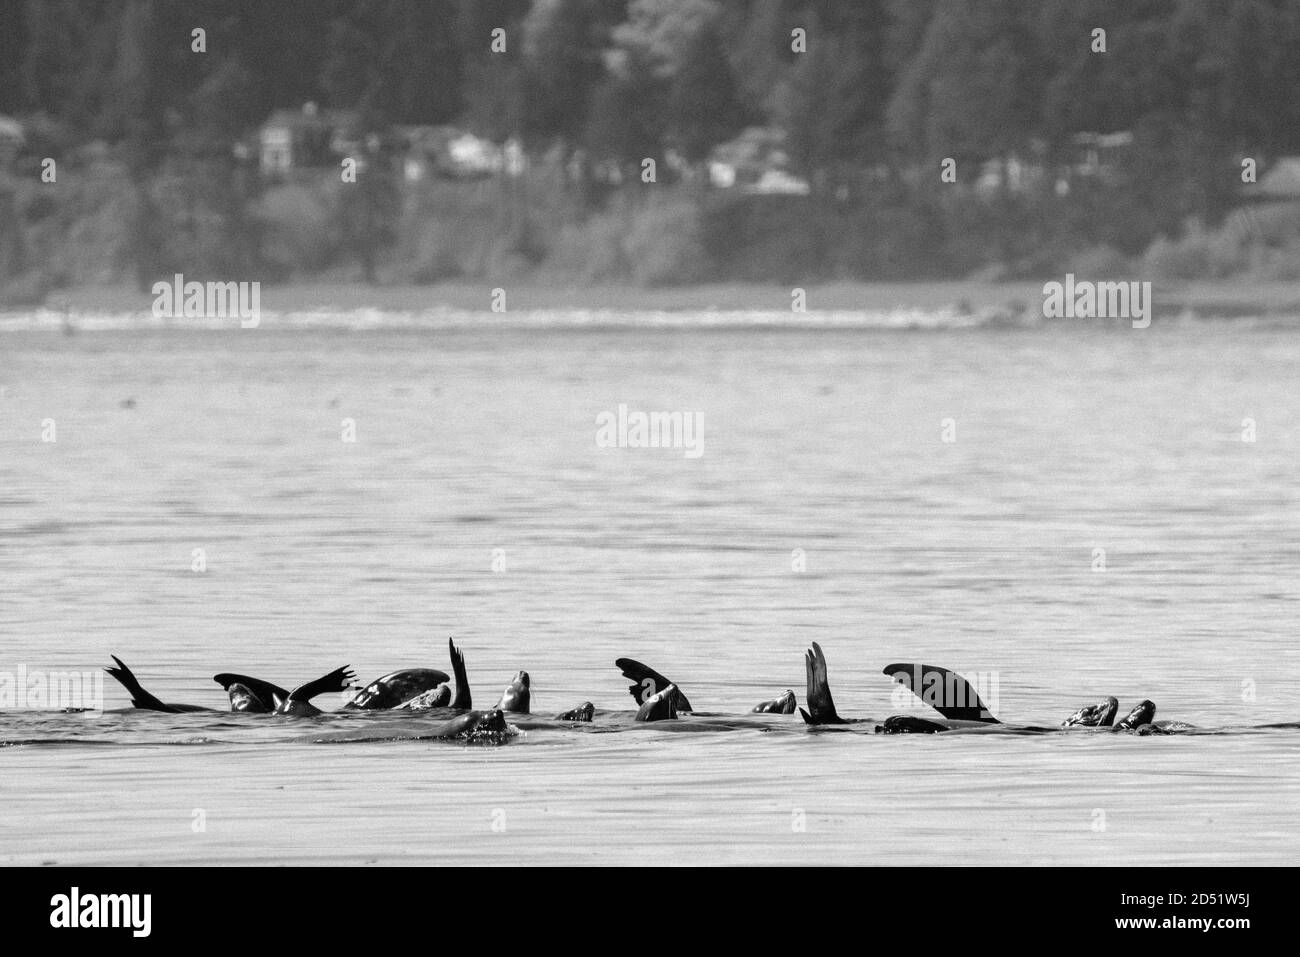 A large group of sea lions floating together in West Seattle Stock Photo